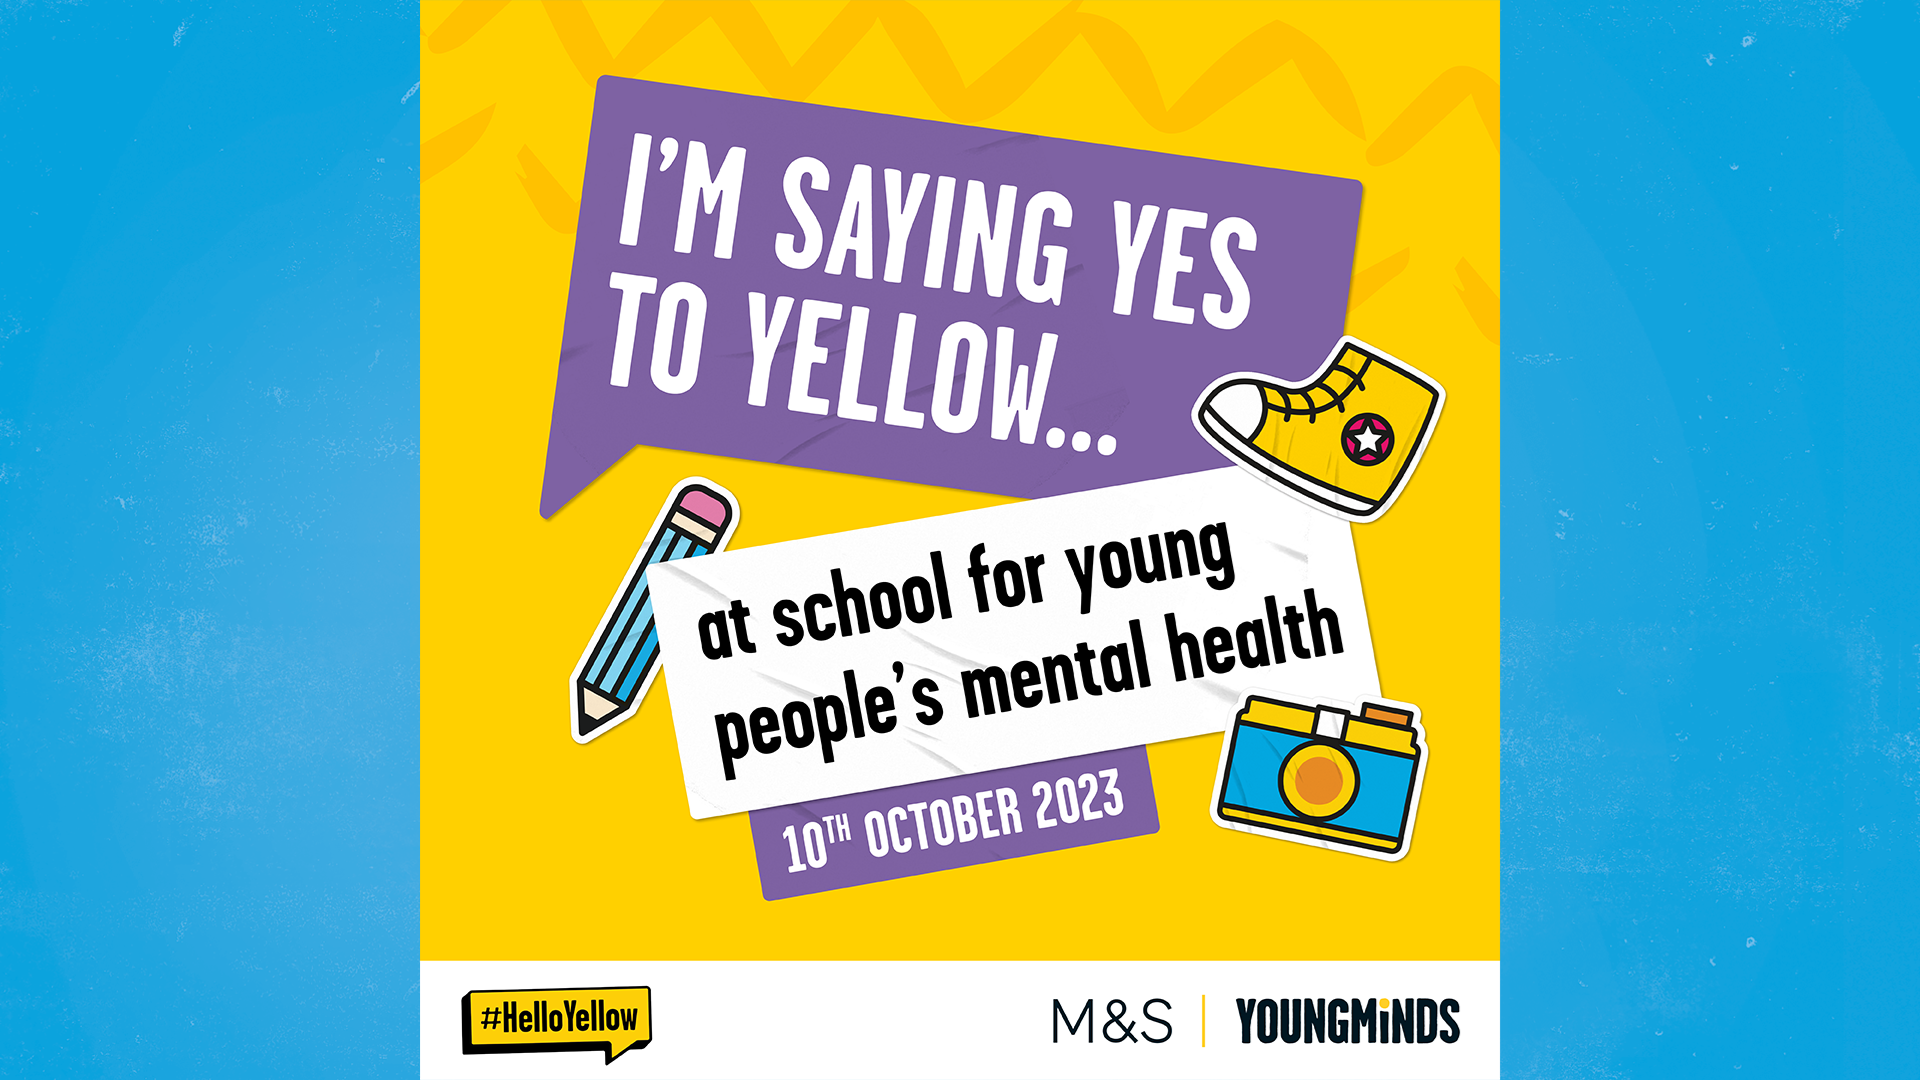 Preview of the resource: social media post for schools. Text reads: I'm saying yes to yellow... at school for young people's mental health. 10th October 2023.